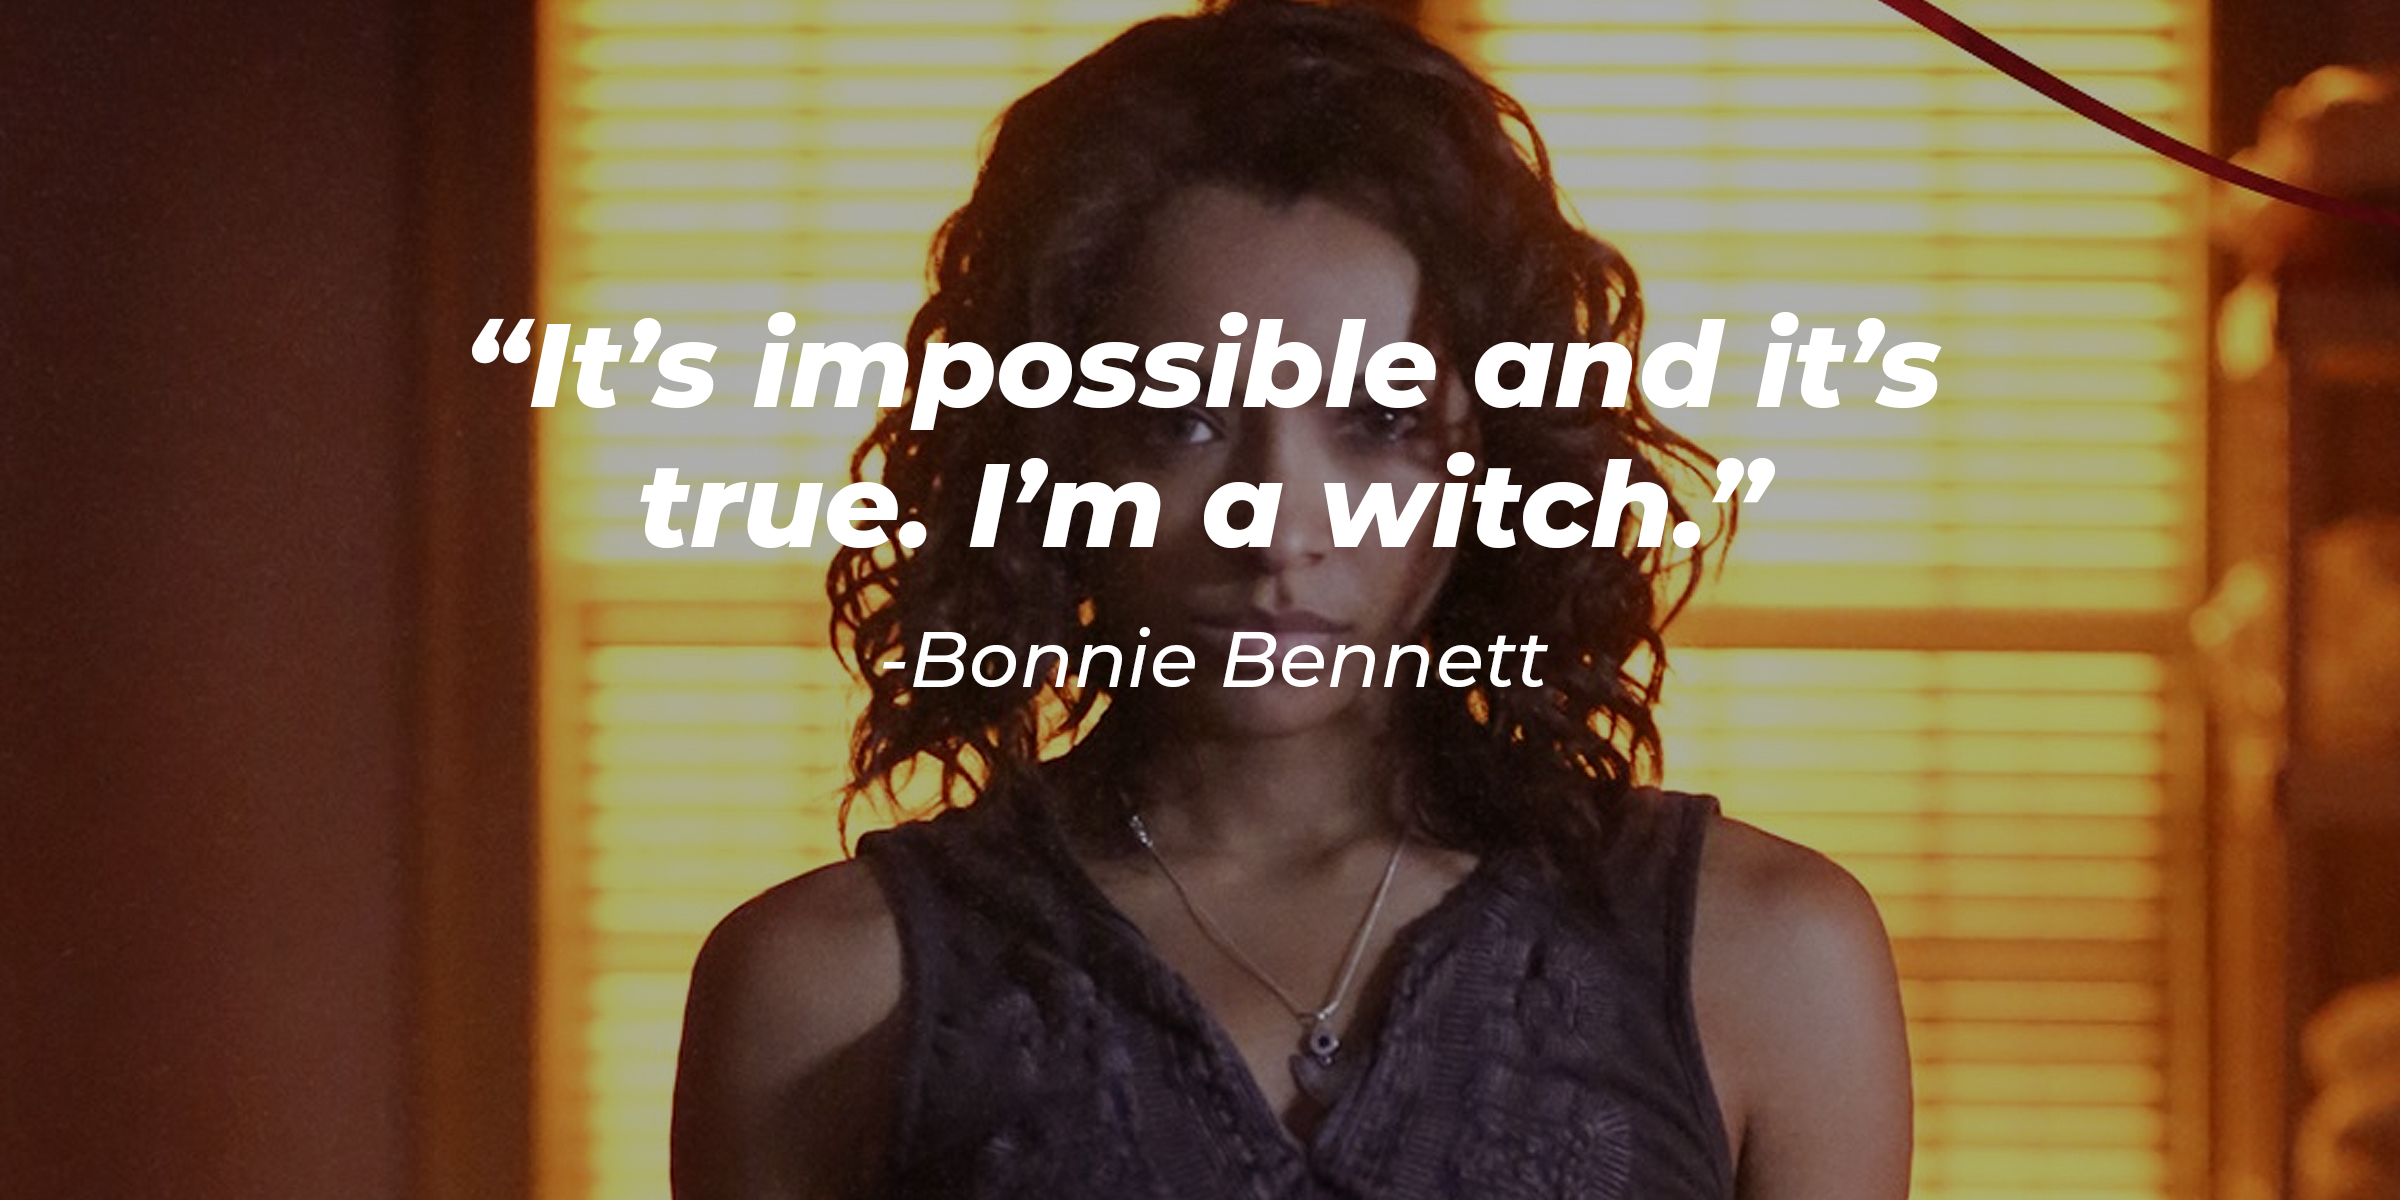 An image of Bonnie Bennett with her quote: “It’s impossible and it’s true. I’m a witch.” | Source: facebook.com/thevampirediaries